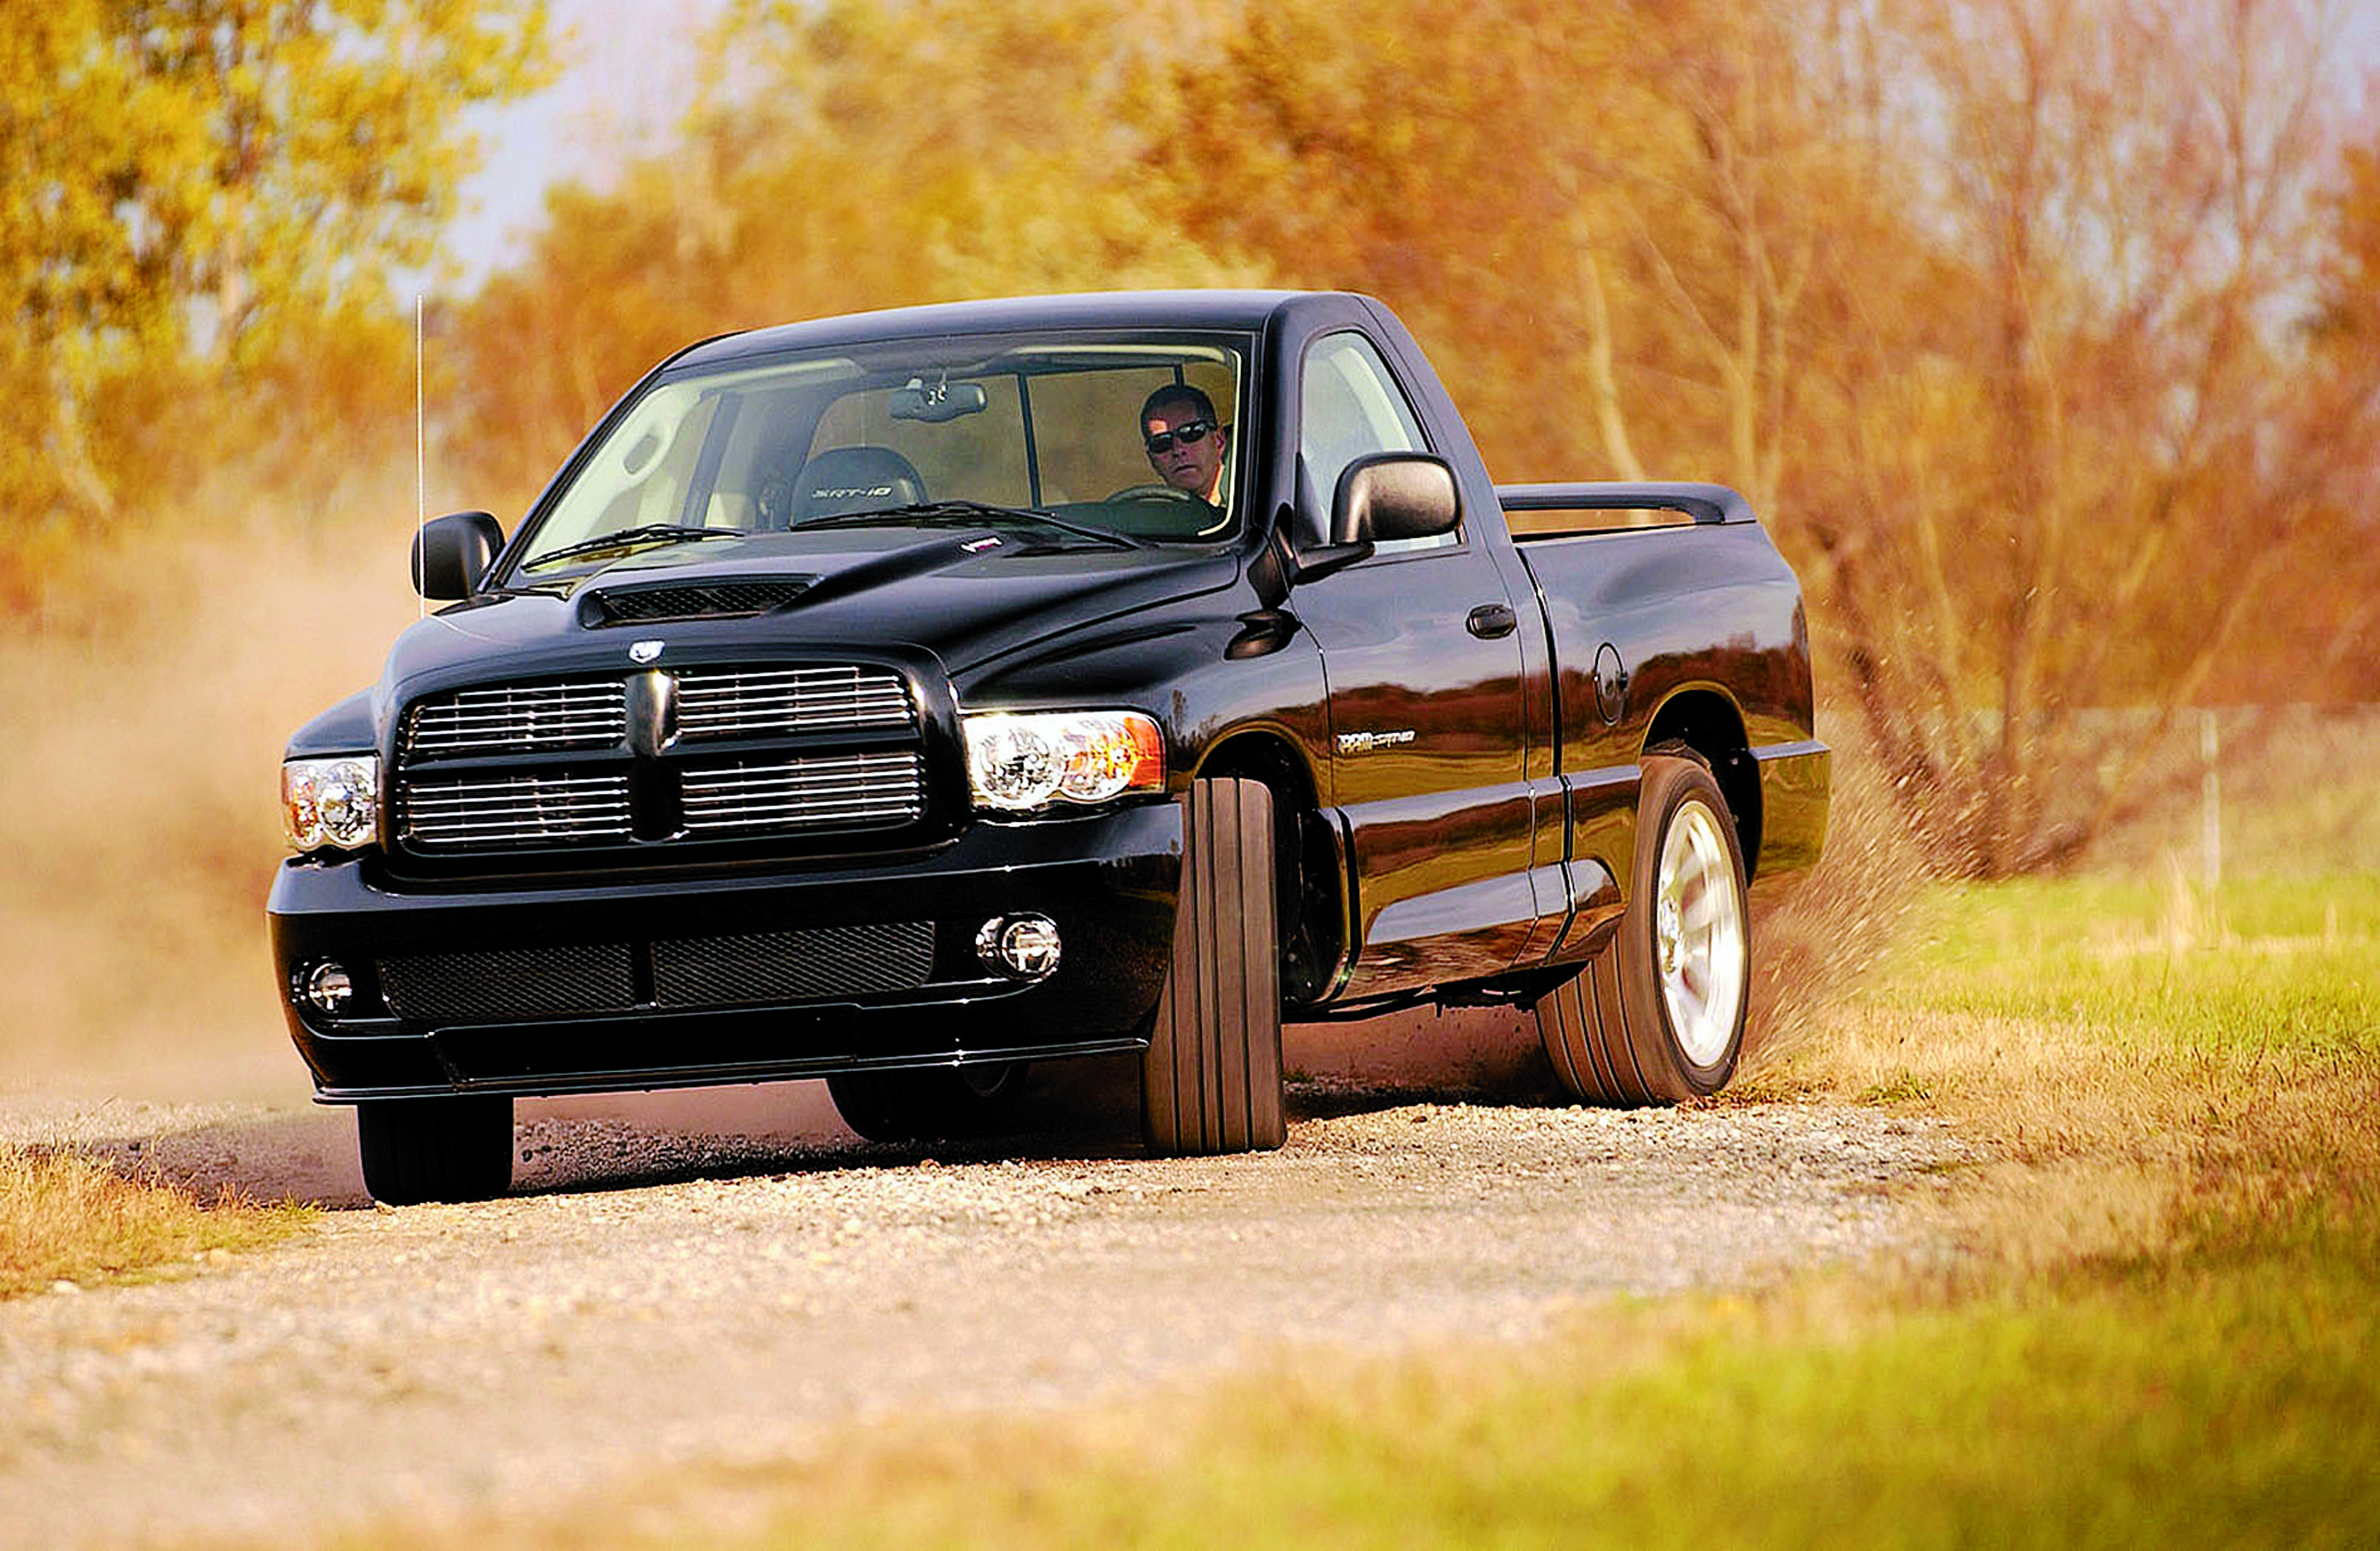 2004 Dodge Ram SRT-10 Is a Viper with a Pickup Bed